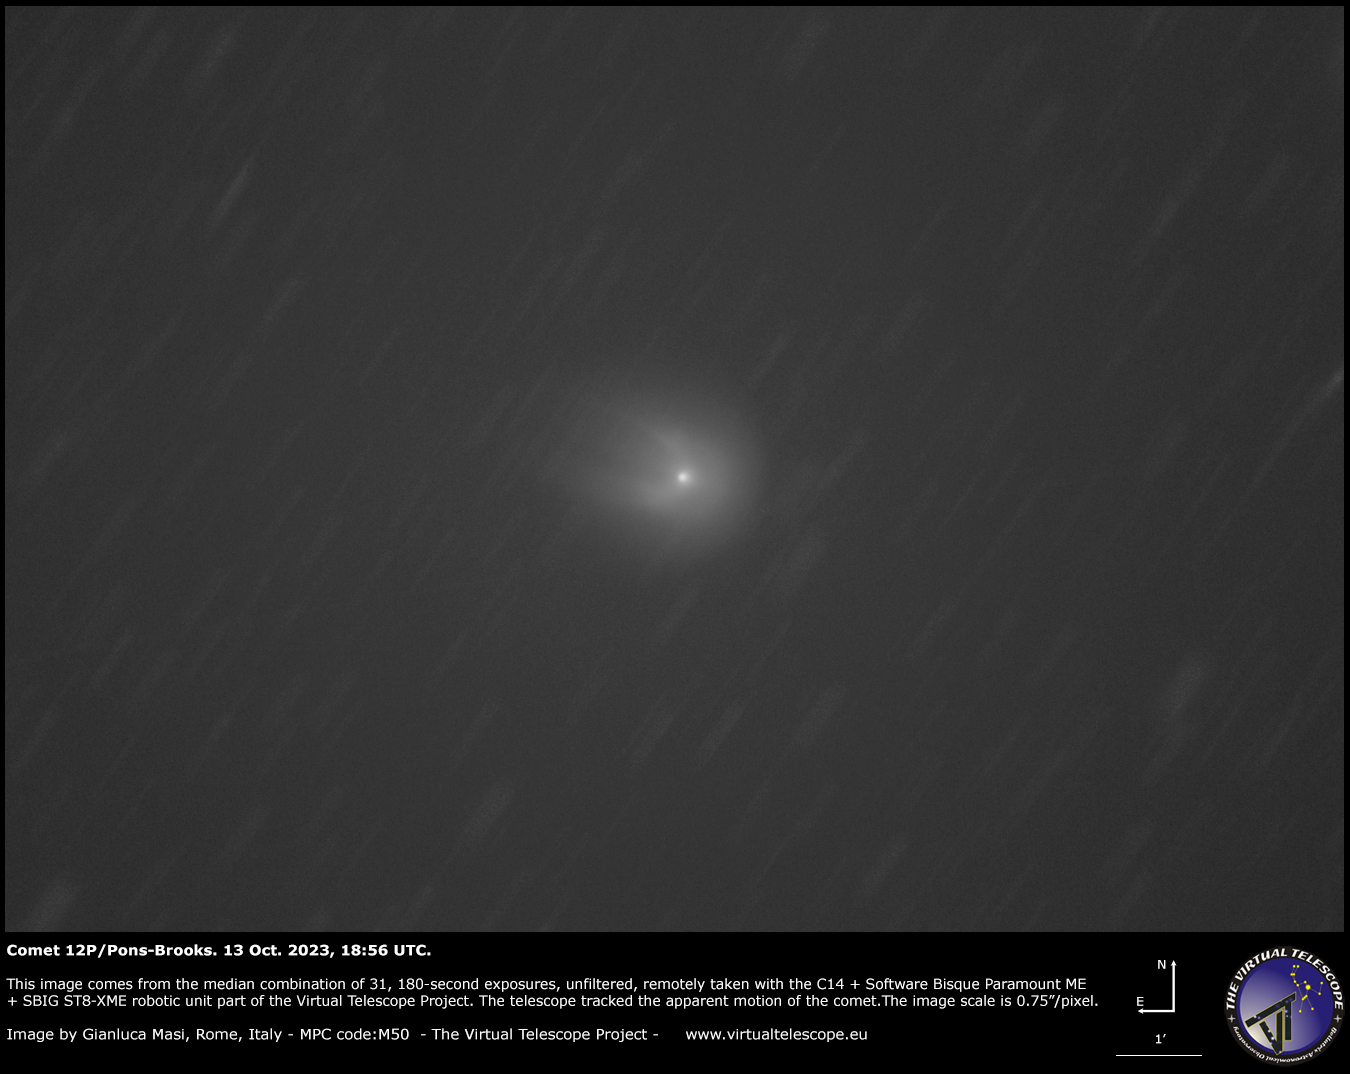 Comet 12P/Pons-Brooks in outburst: 13 Oct. 2023.